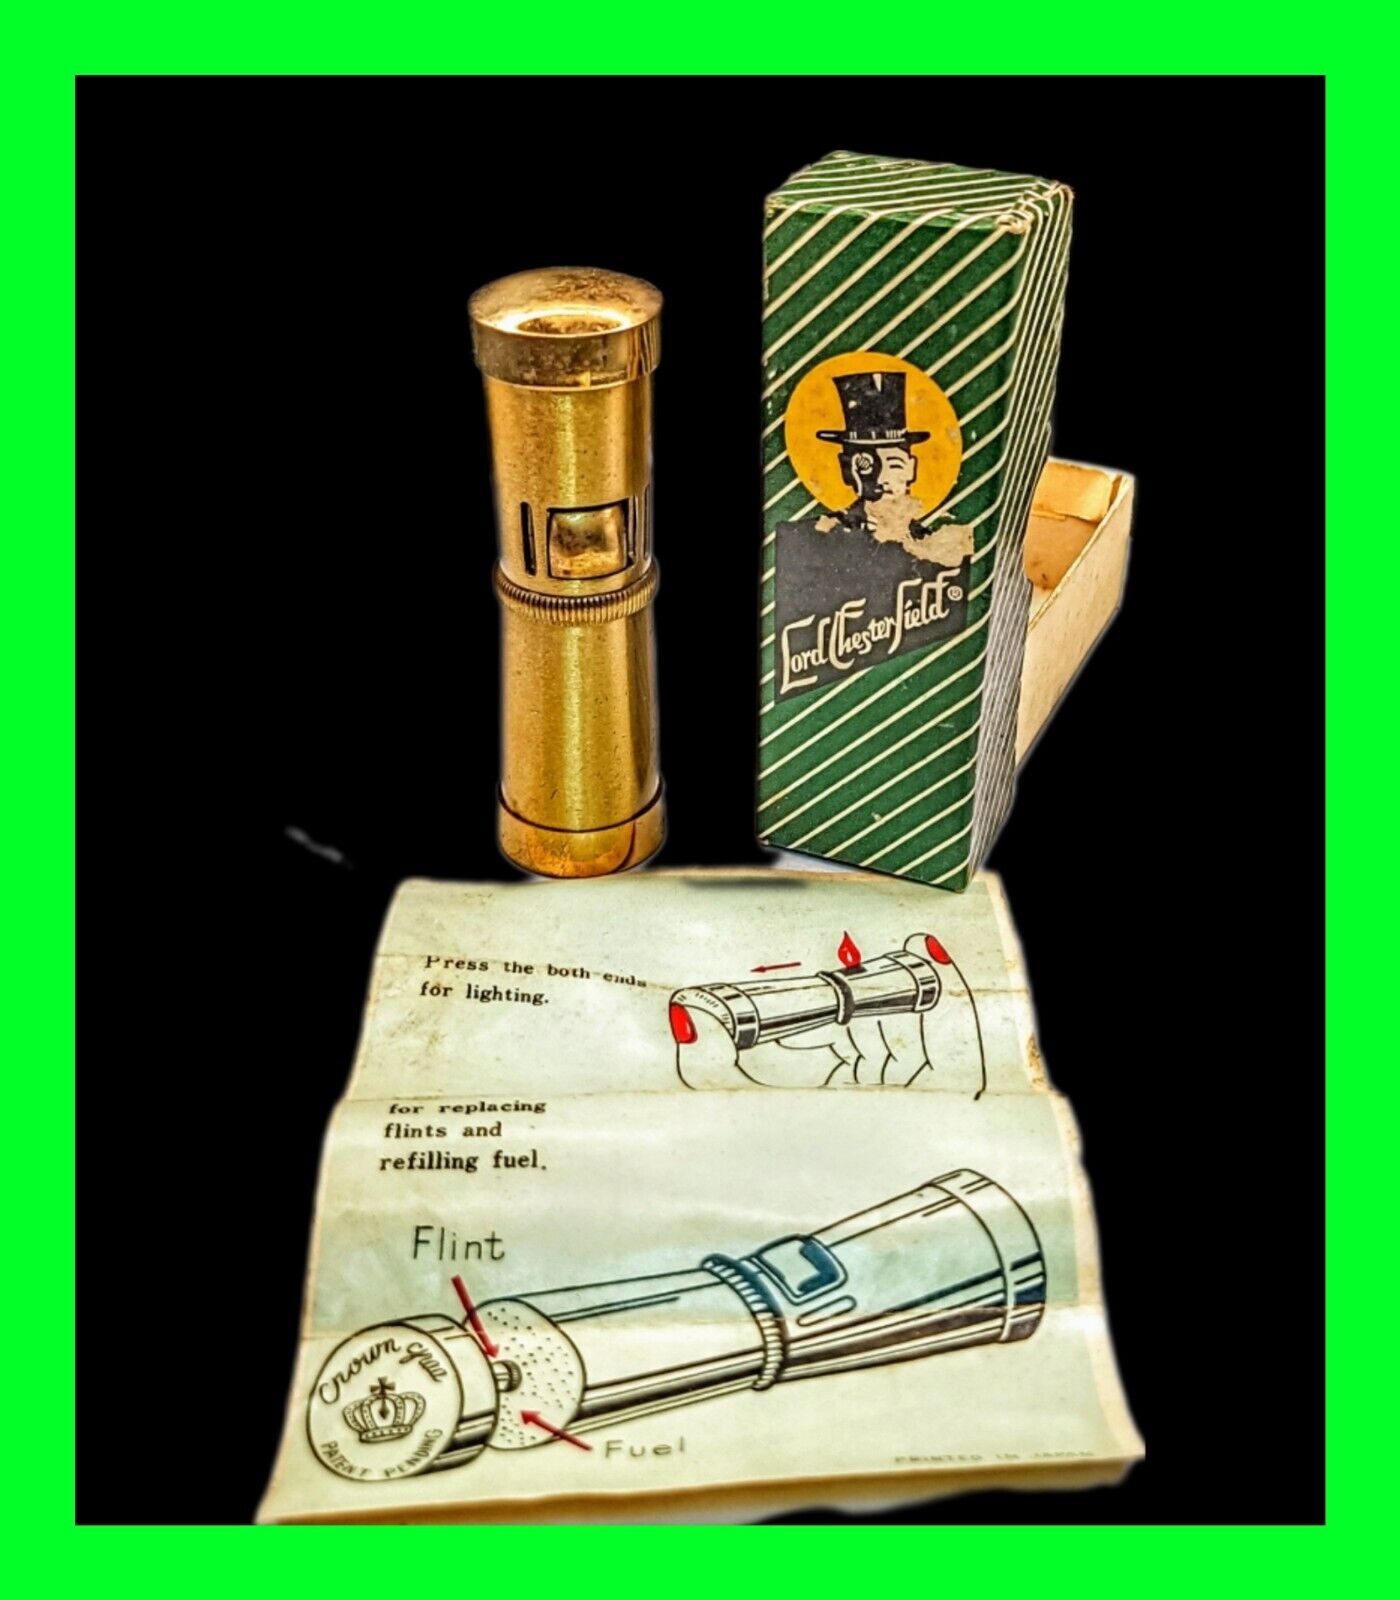 Rare Vintage Lord Chesterfield Pipe Squeeze Petrol Lighter With Original Box New